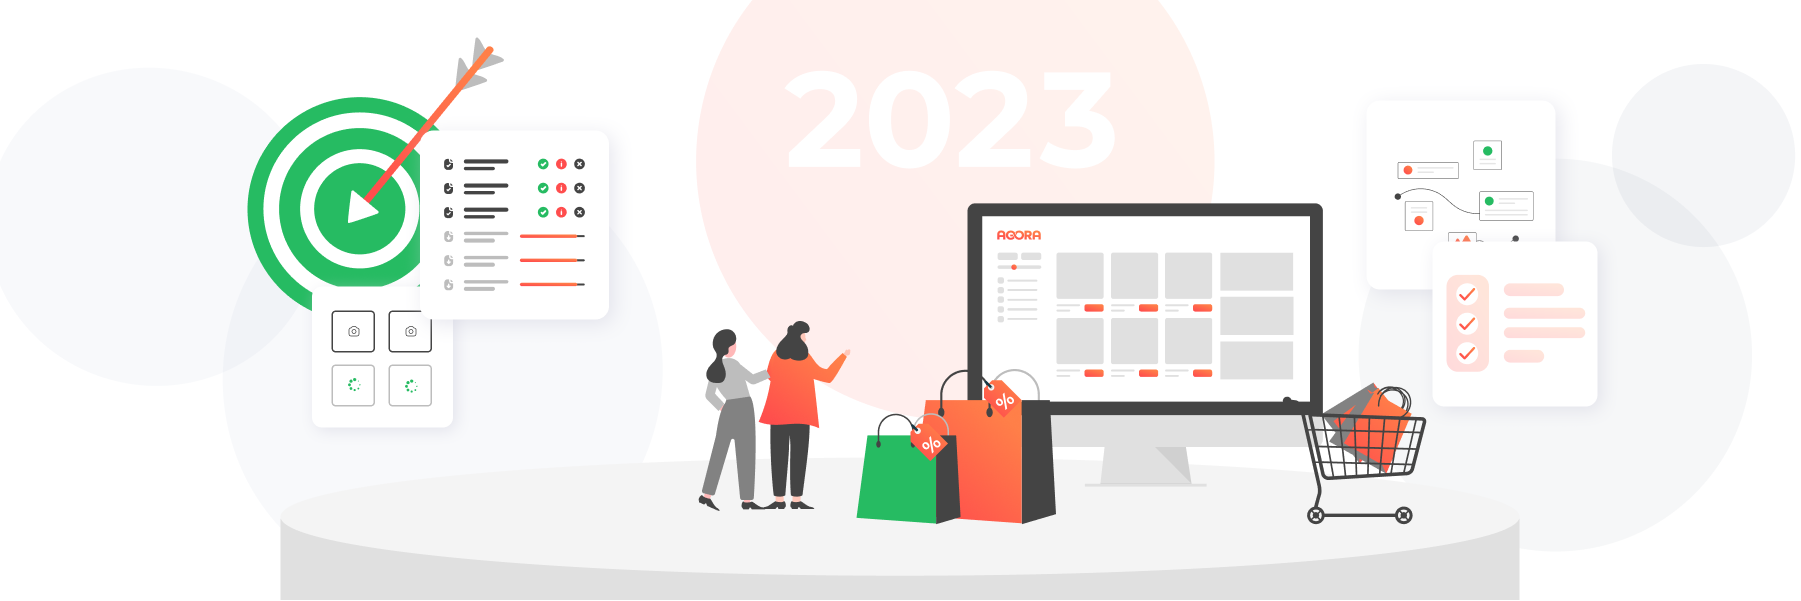 E-commerce trends in 2023